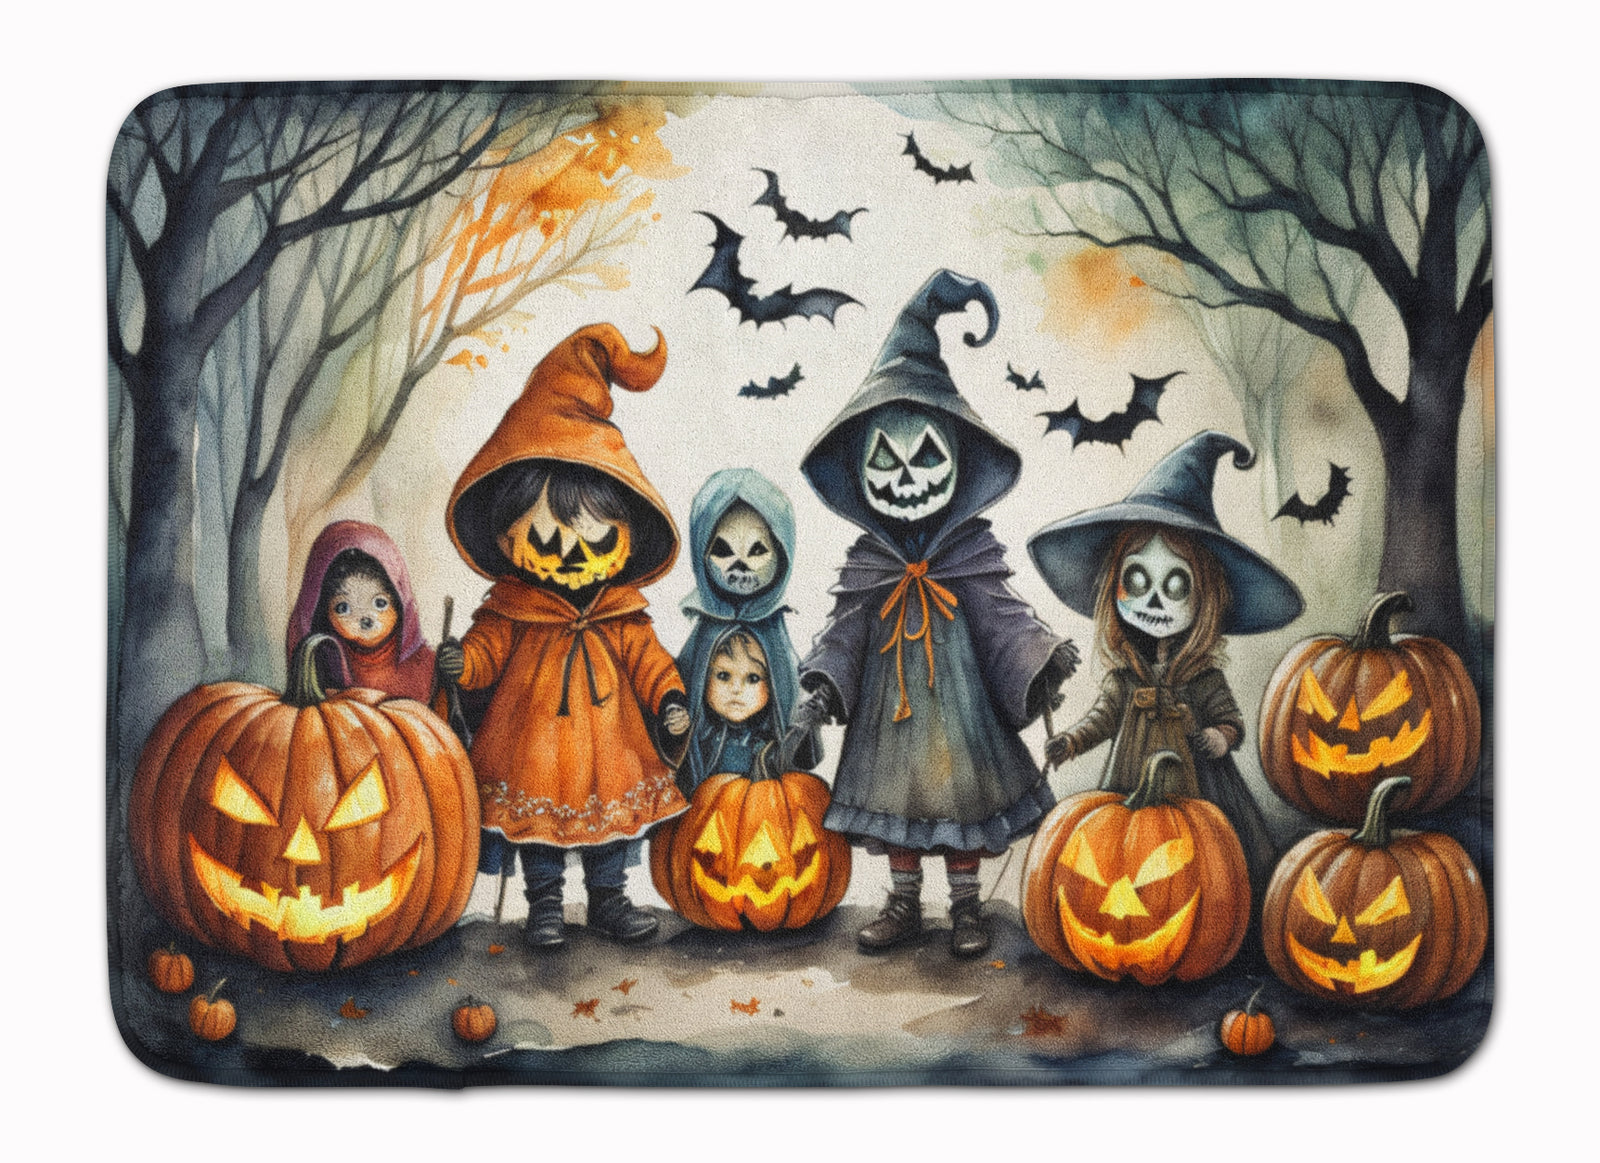 Buy this Trick or Treaters Spooky Halloween Memory Foam Kitchen Mat